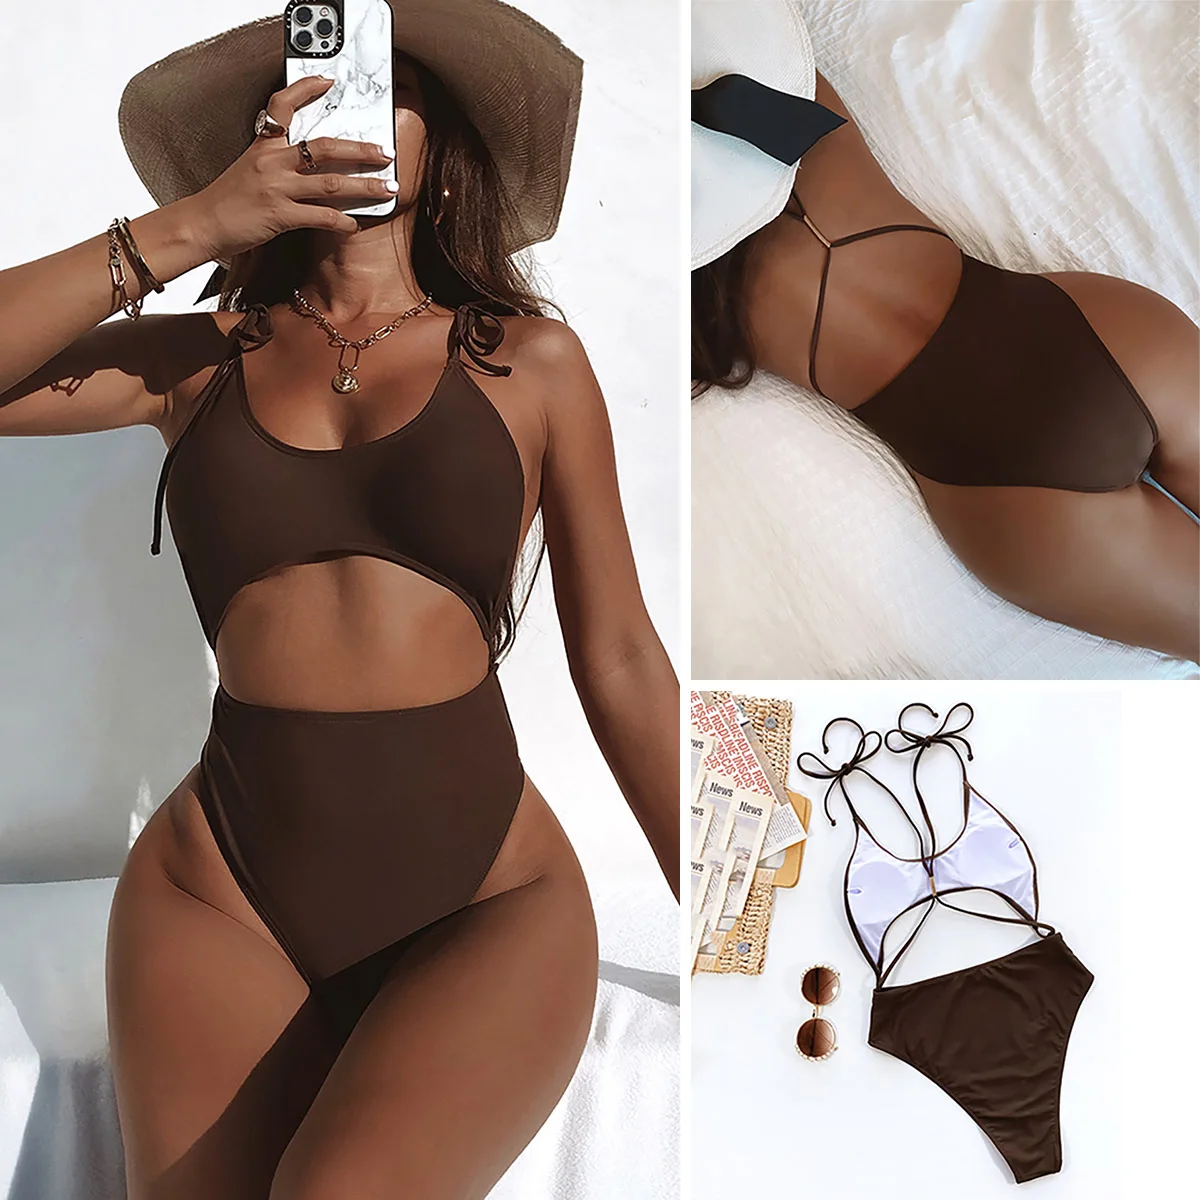 

Sexy One Piece Swimsuit Brown Bandage Cut Out Monokini High Waisted Bathing Suit String Summer Swimming Beachwear Female Biquini